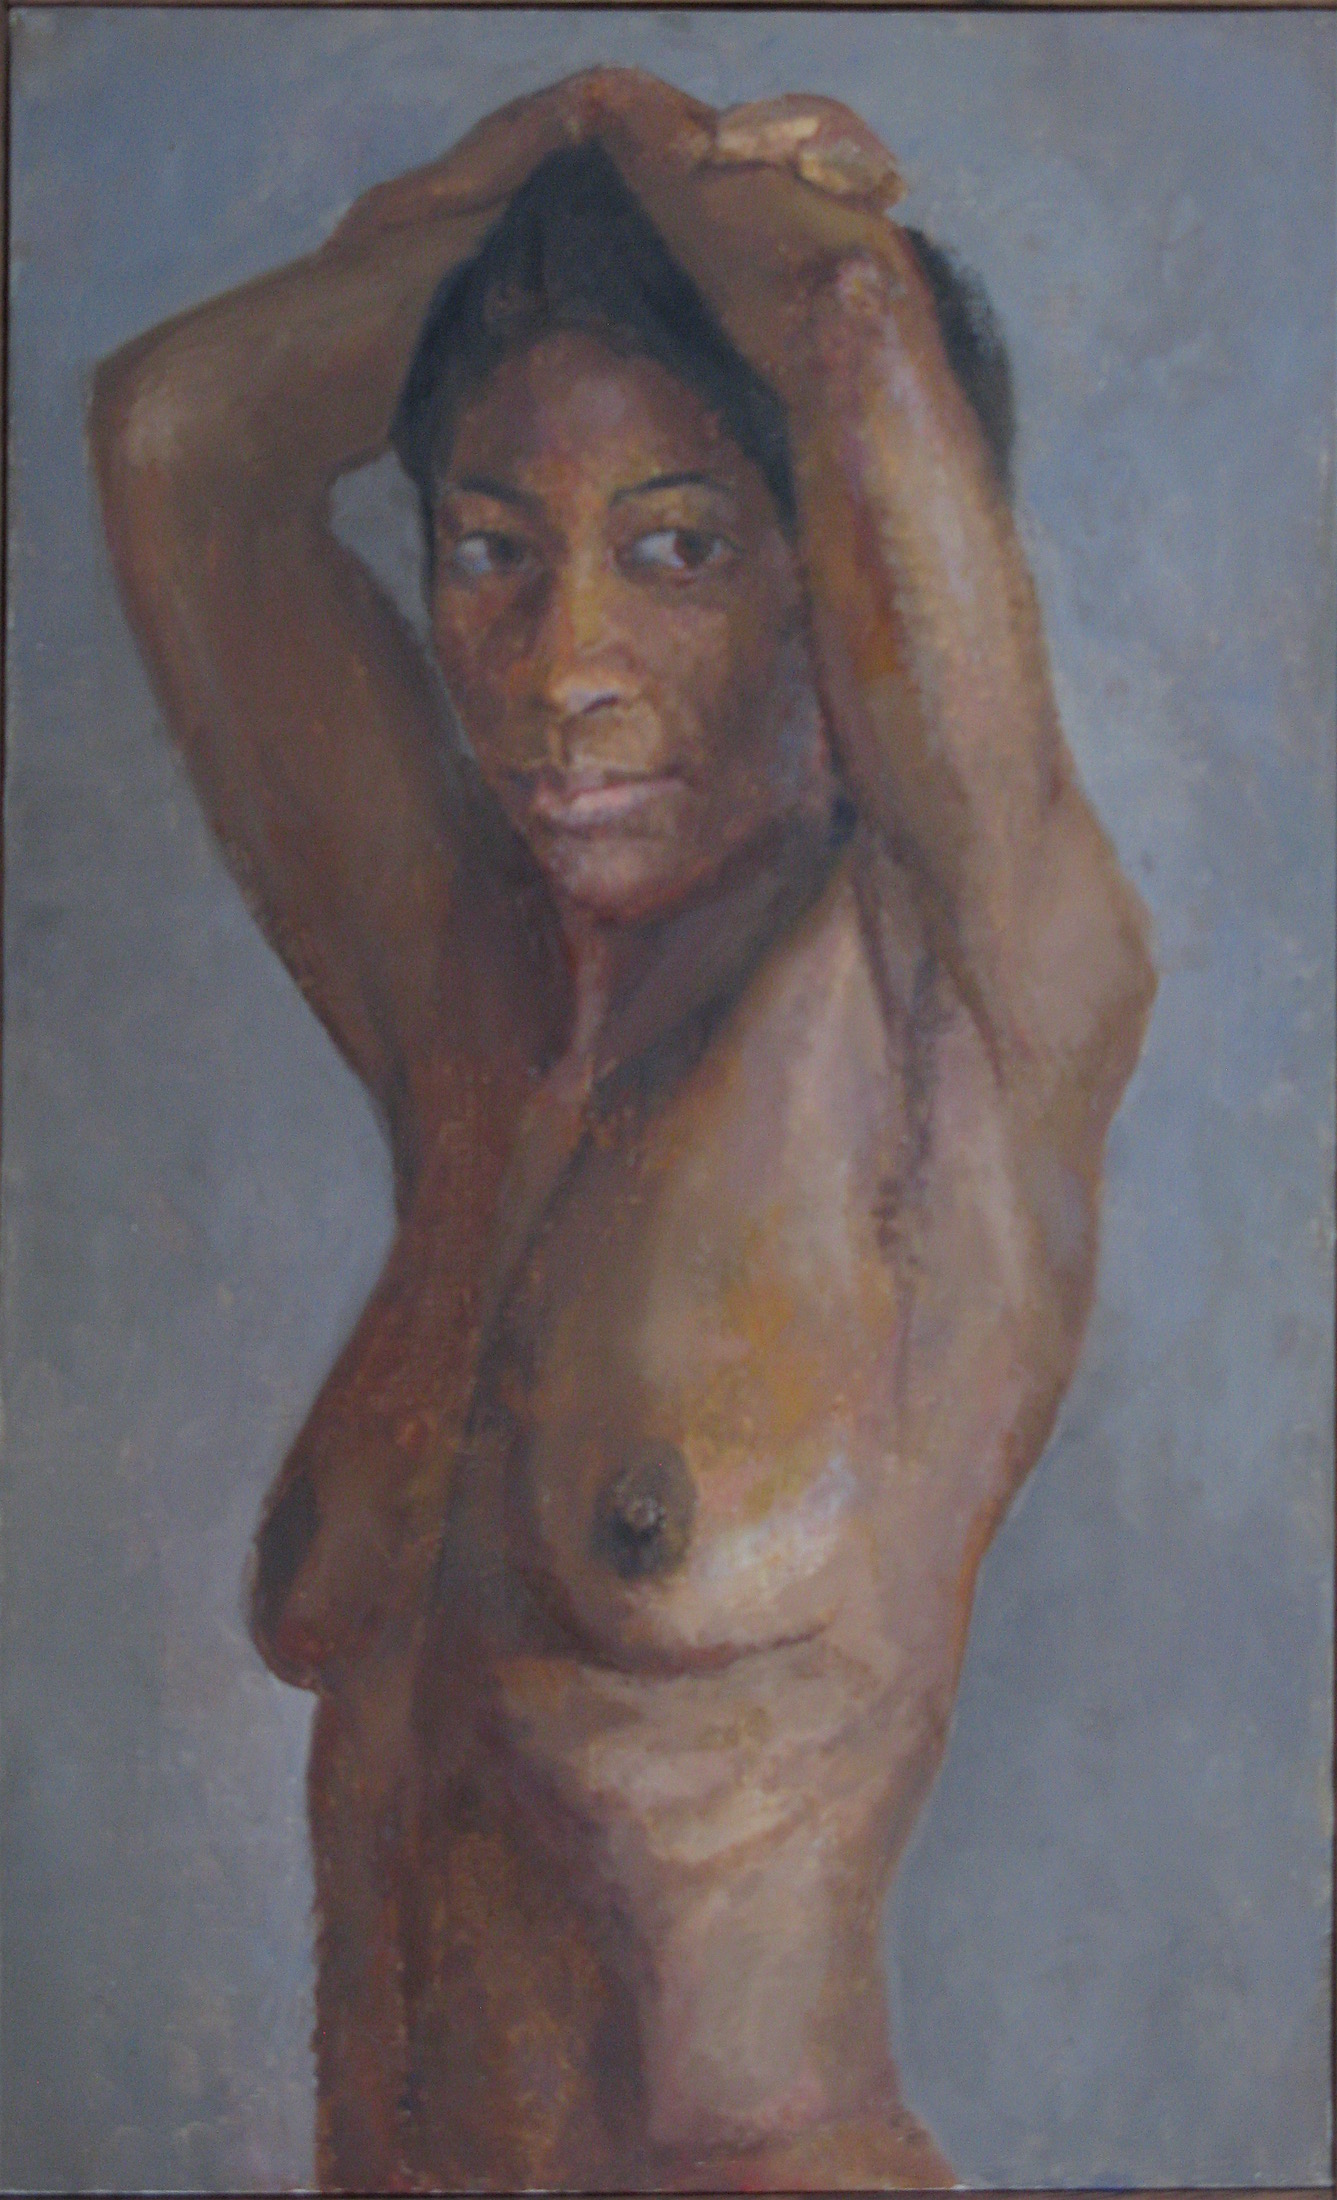 Female Nude, 26 x 16 inches, oil on linen, 1999.